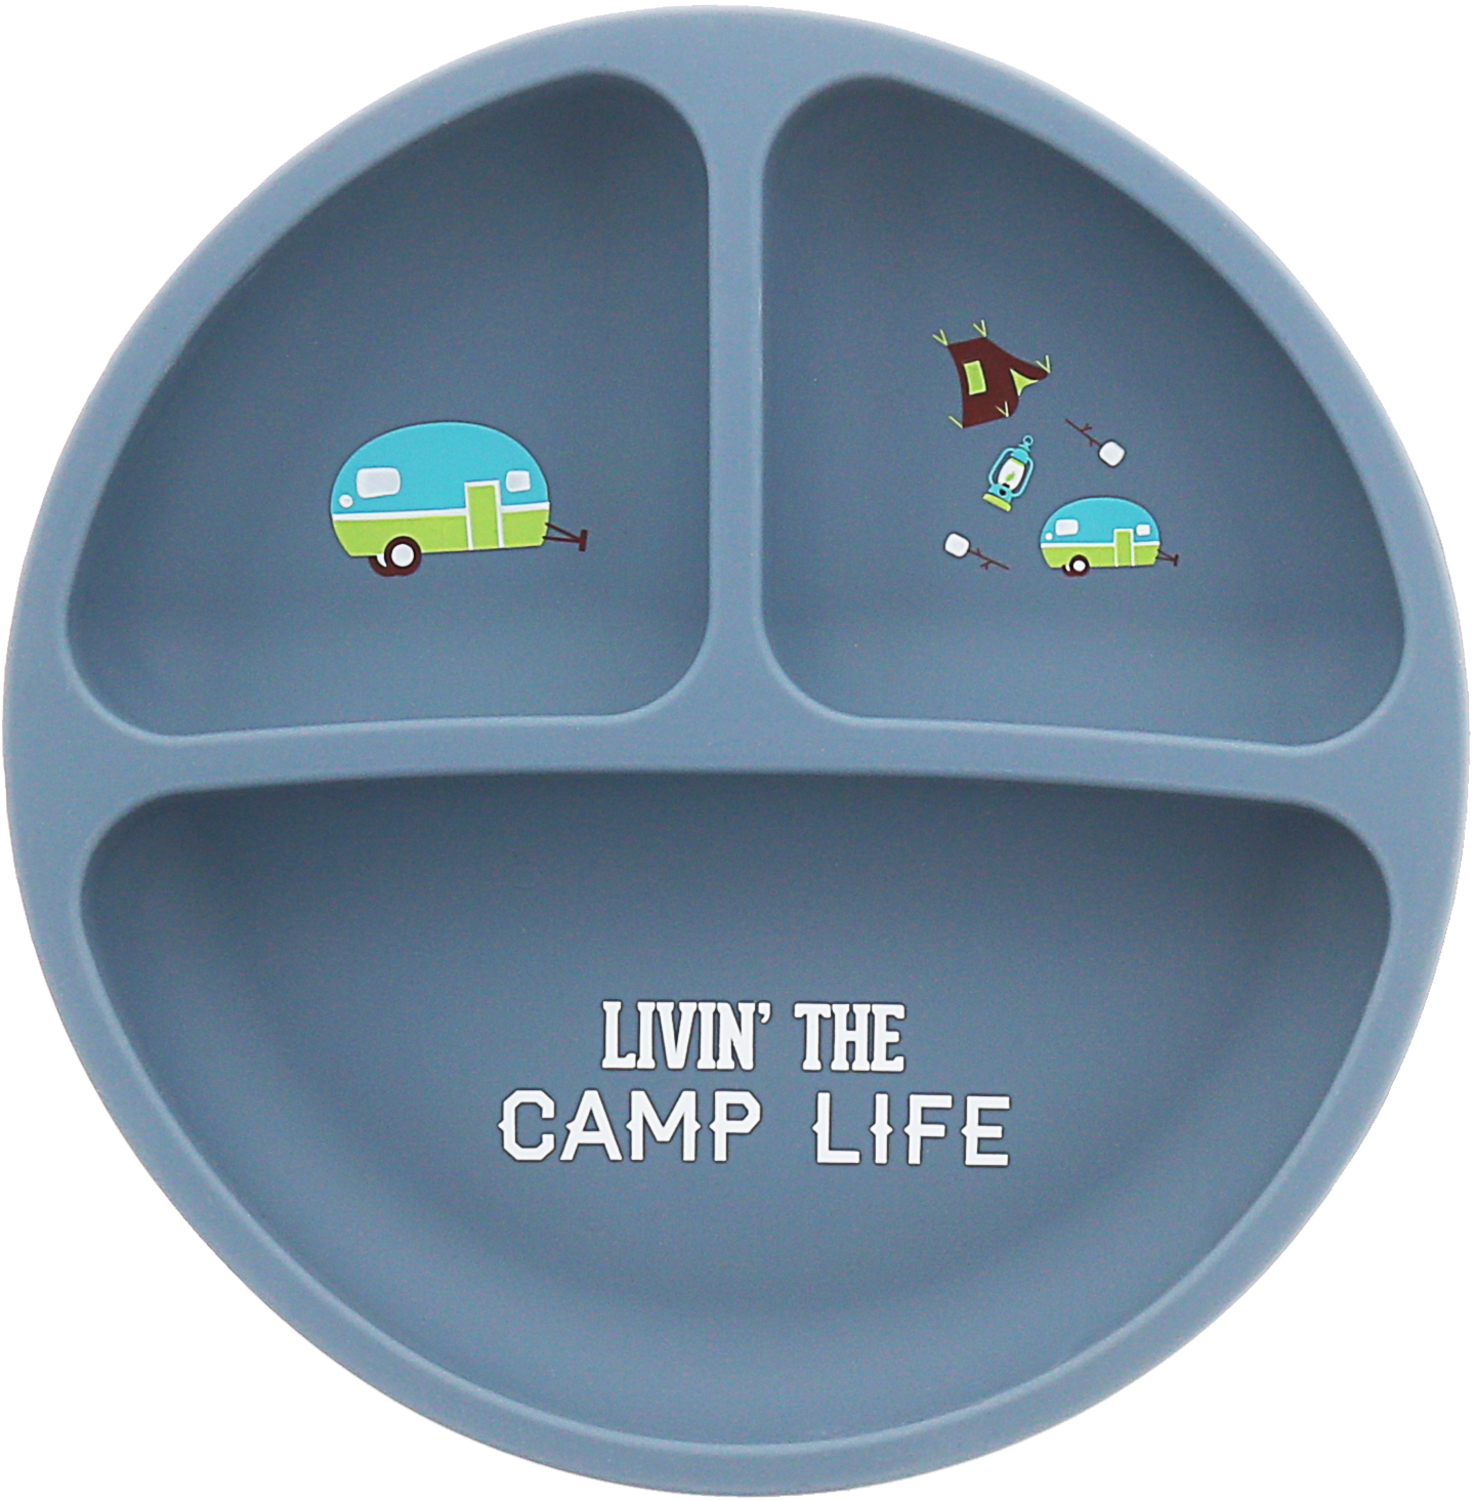 Camp Life by We Baby - Camp Life - 7.75" Divided Silicone Suction Plate